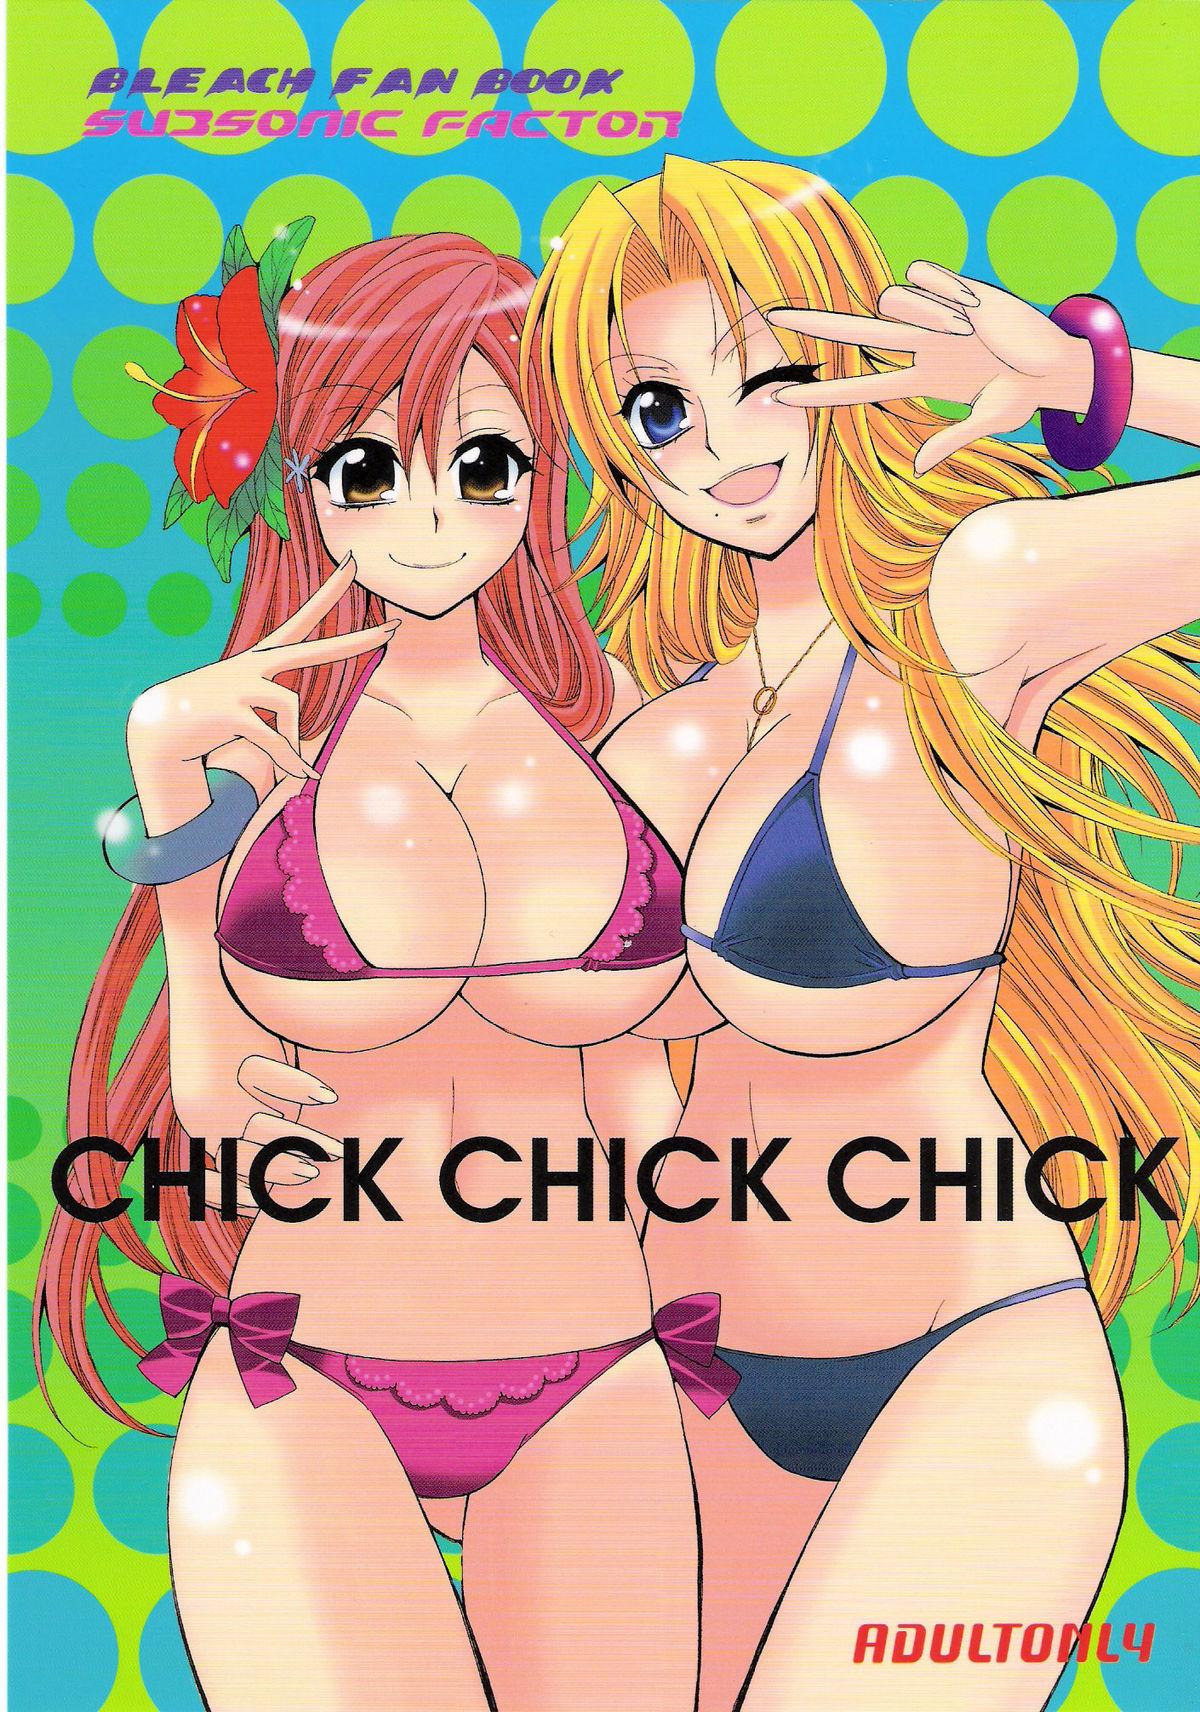 Cruising CHICK CHICK CHICK - Bleach Free - Picture 1